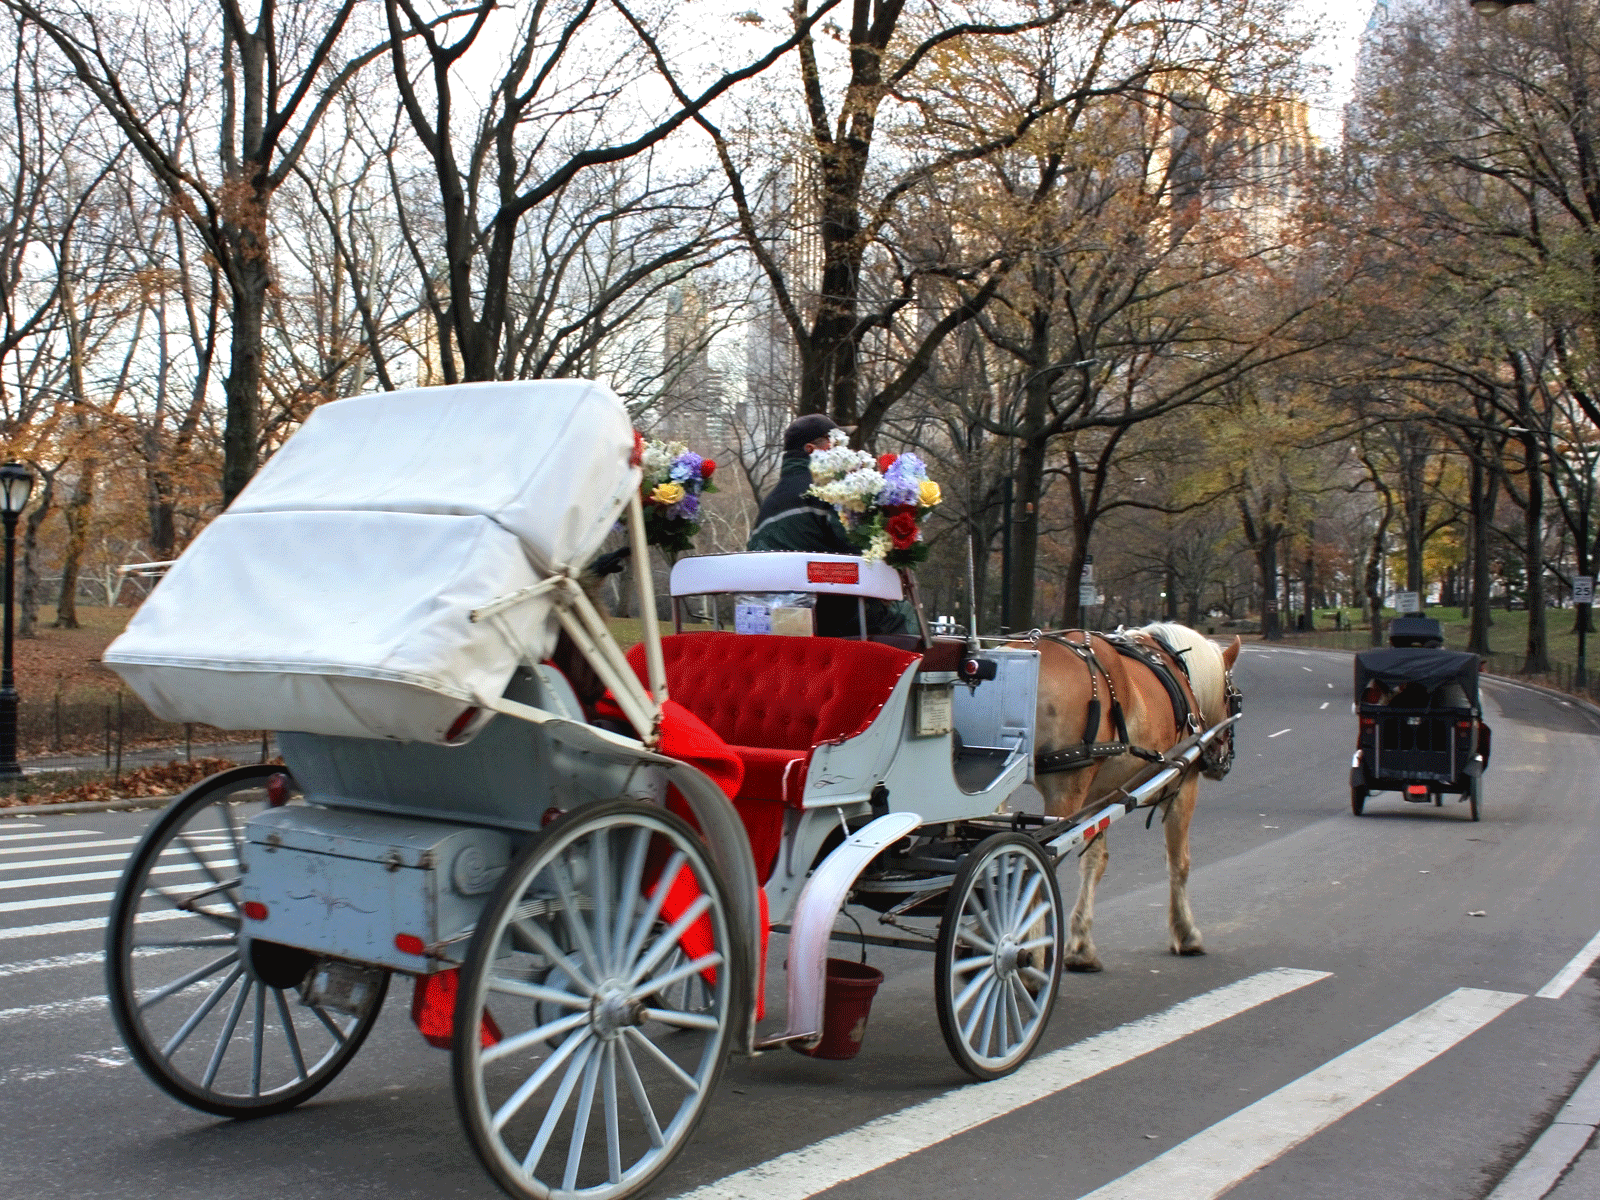 The man, believed to be in his 40s, was trying to unload a horse-drawn carriage similar to that shown above from a lorry